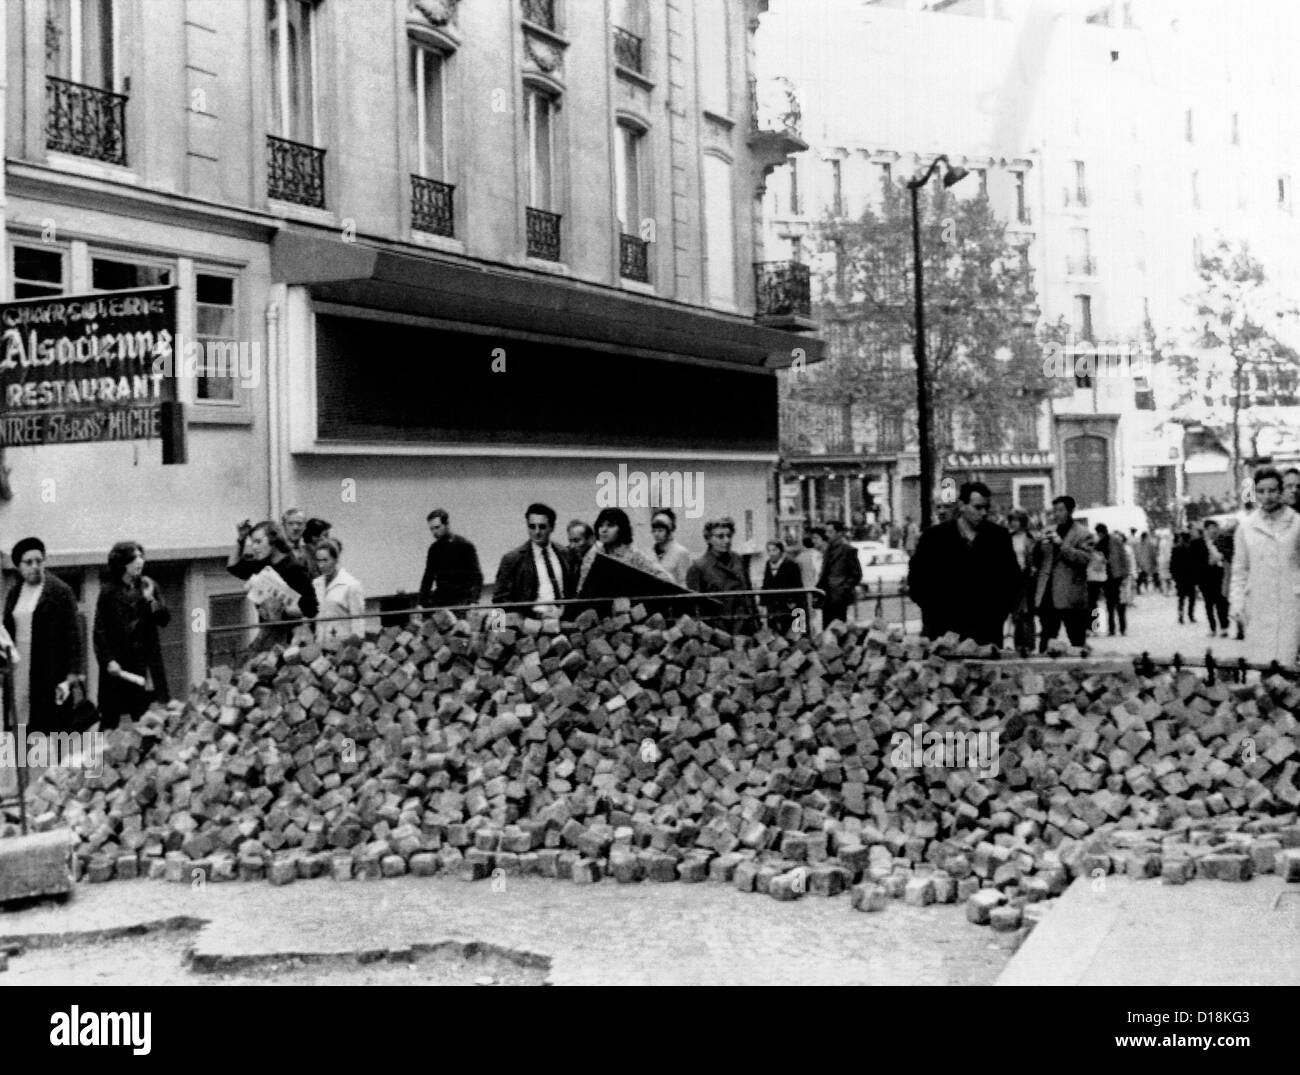 Stone barricade in Paris' Latin Quarter during the May 1968 general strike and demonstrations in Paris. May 26, 1968. Stock Photo